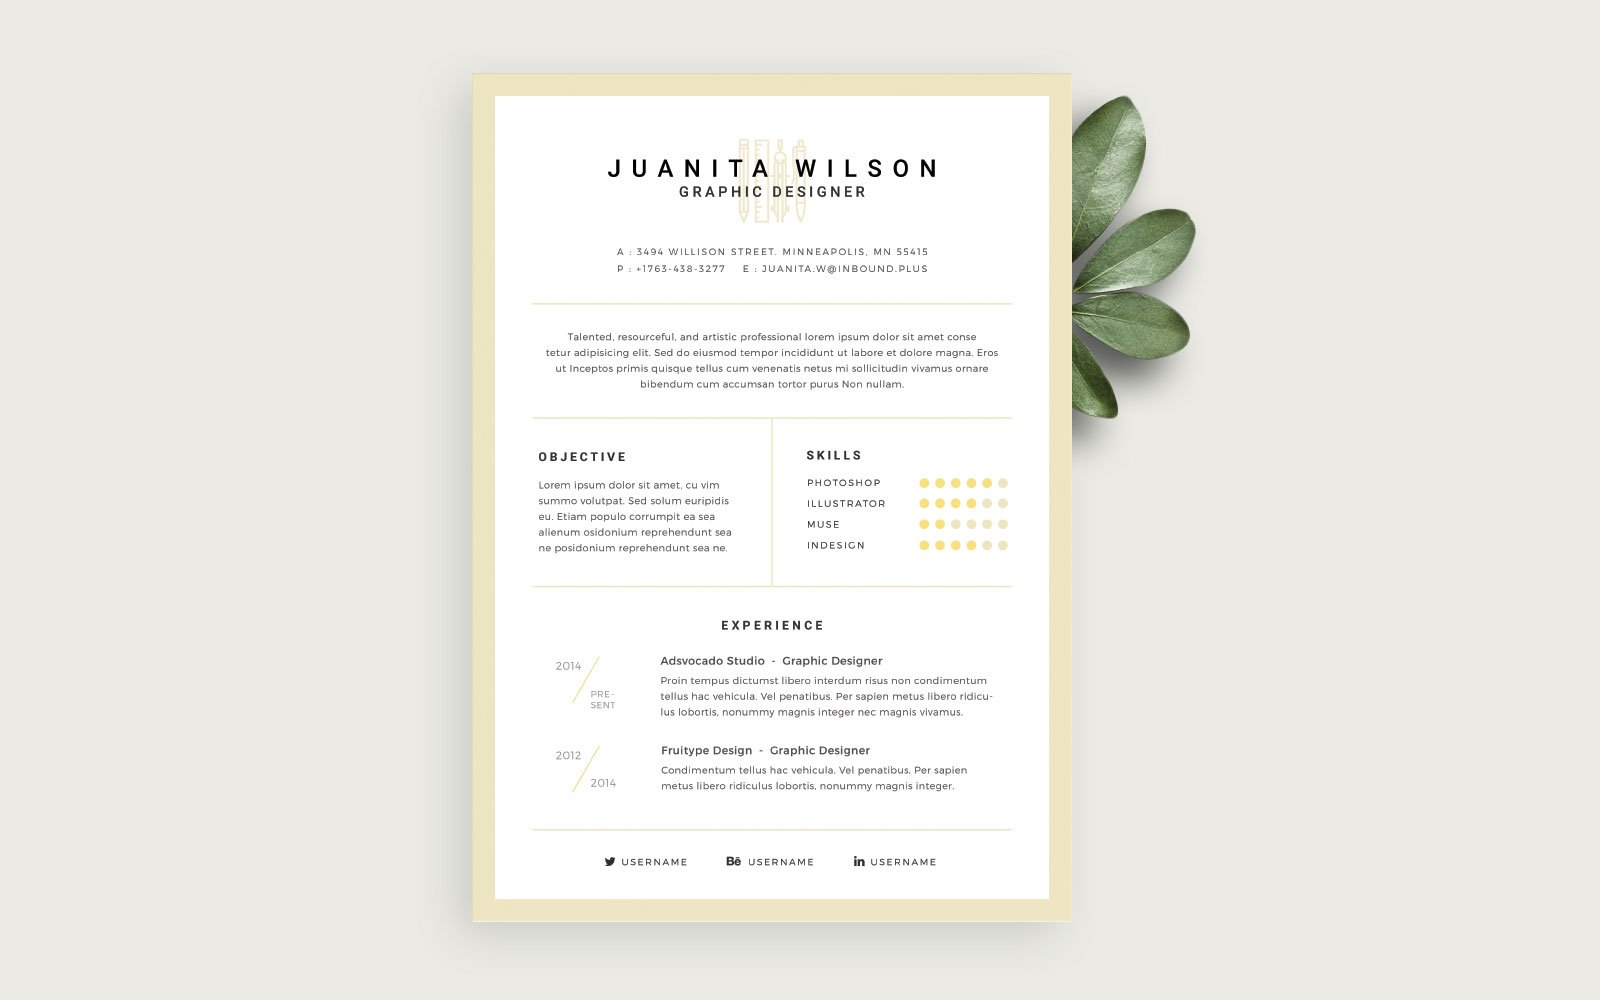 Template: Clean Resume | PSDchat